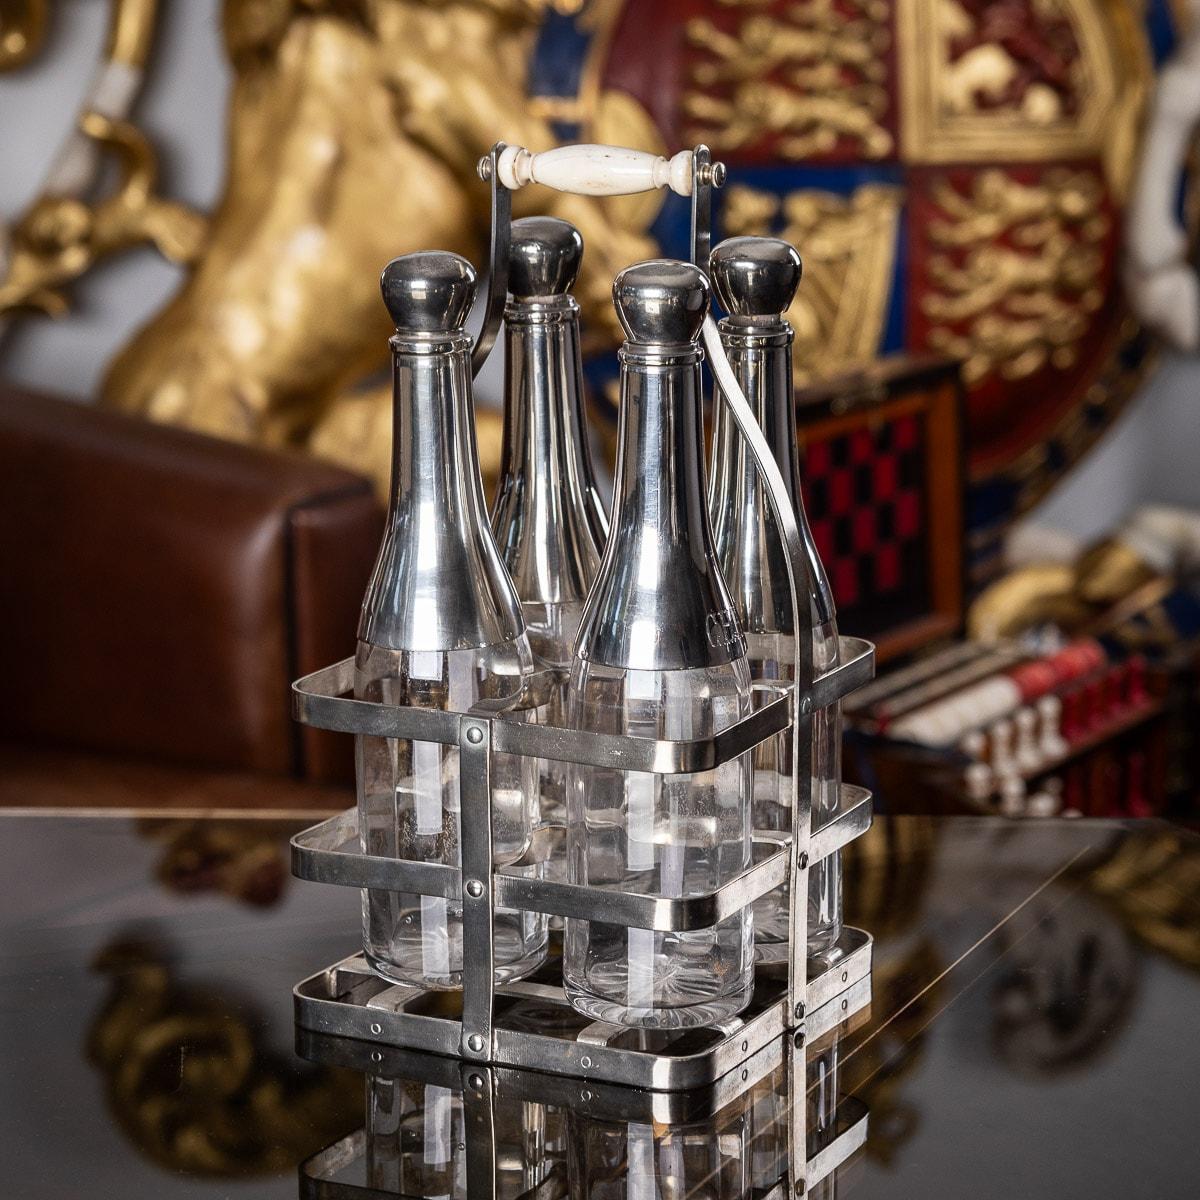 Antique late-19th century French four bottle Tantalus, clear glass applied with silver plated mounts and stoppers. The tops are engraved with various drinks, such as curacao, anisette, chartreuse and fine champagne. The four bottles are presented in